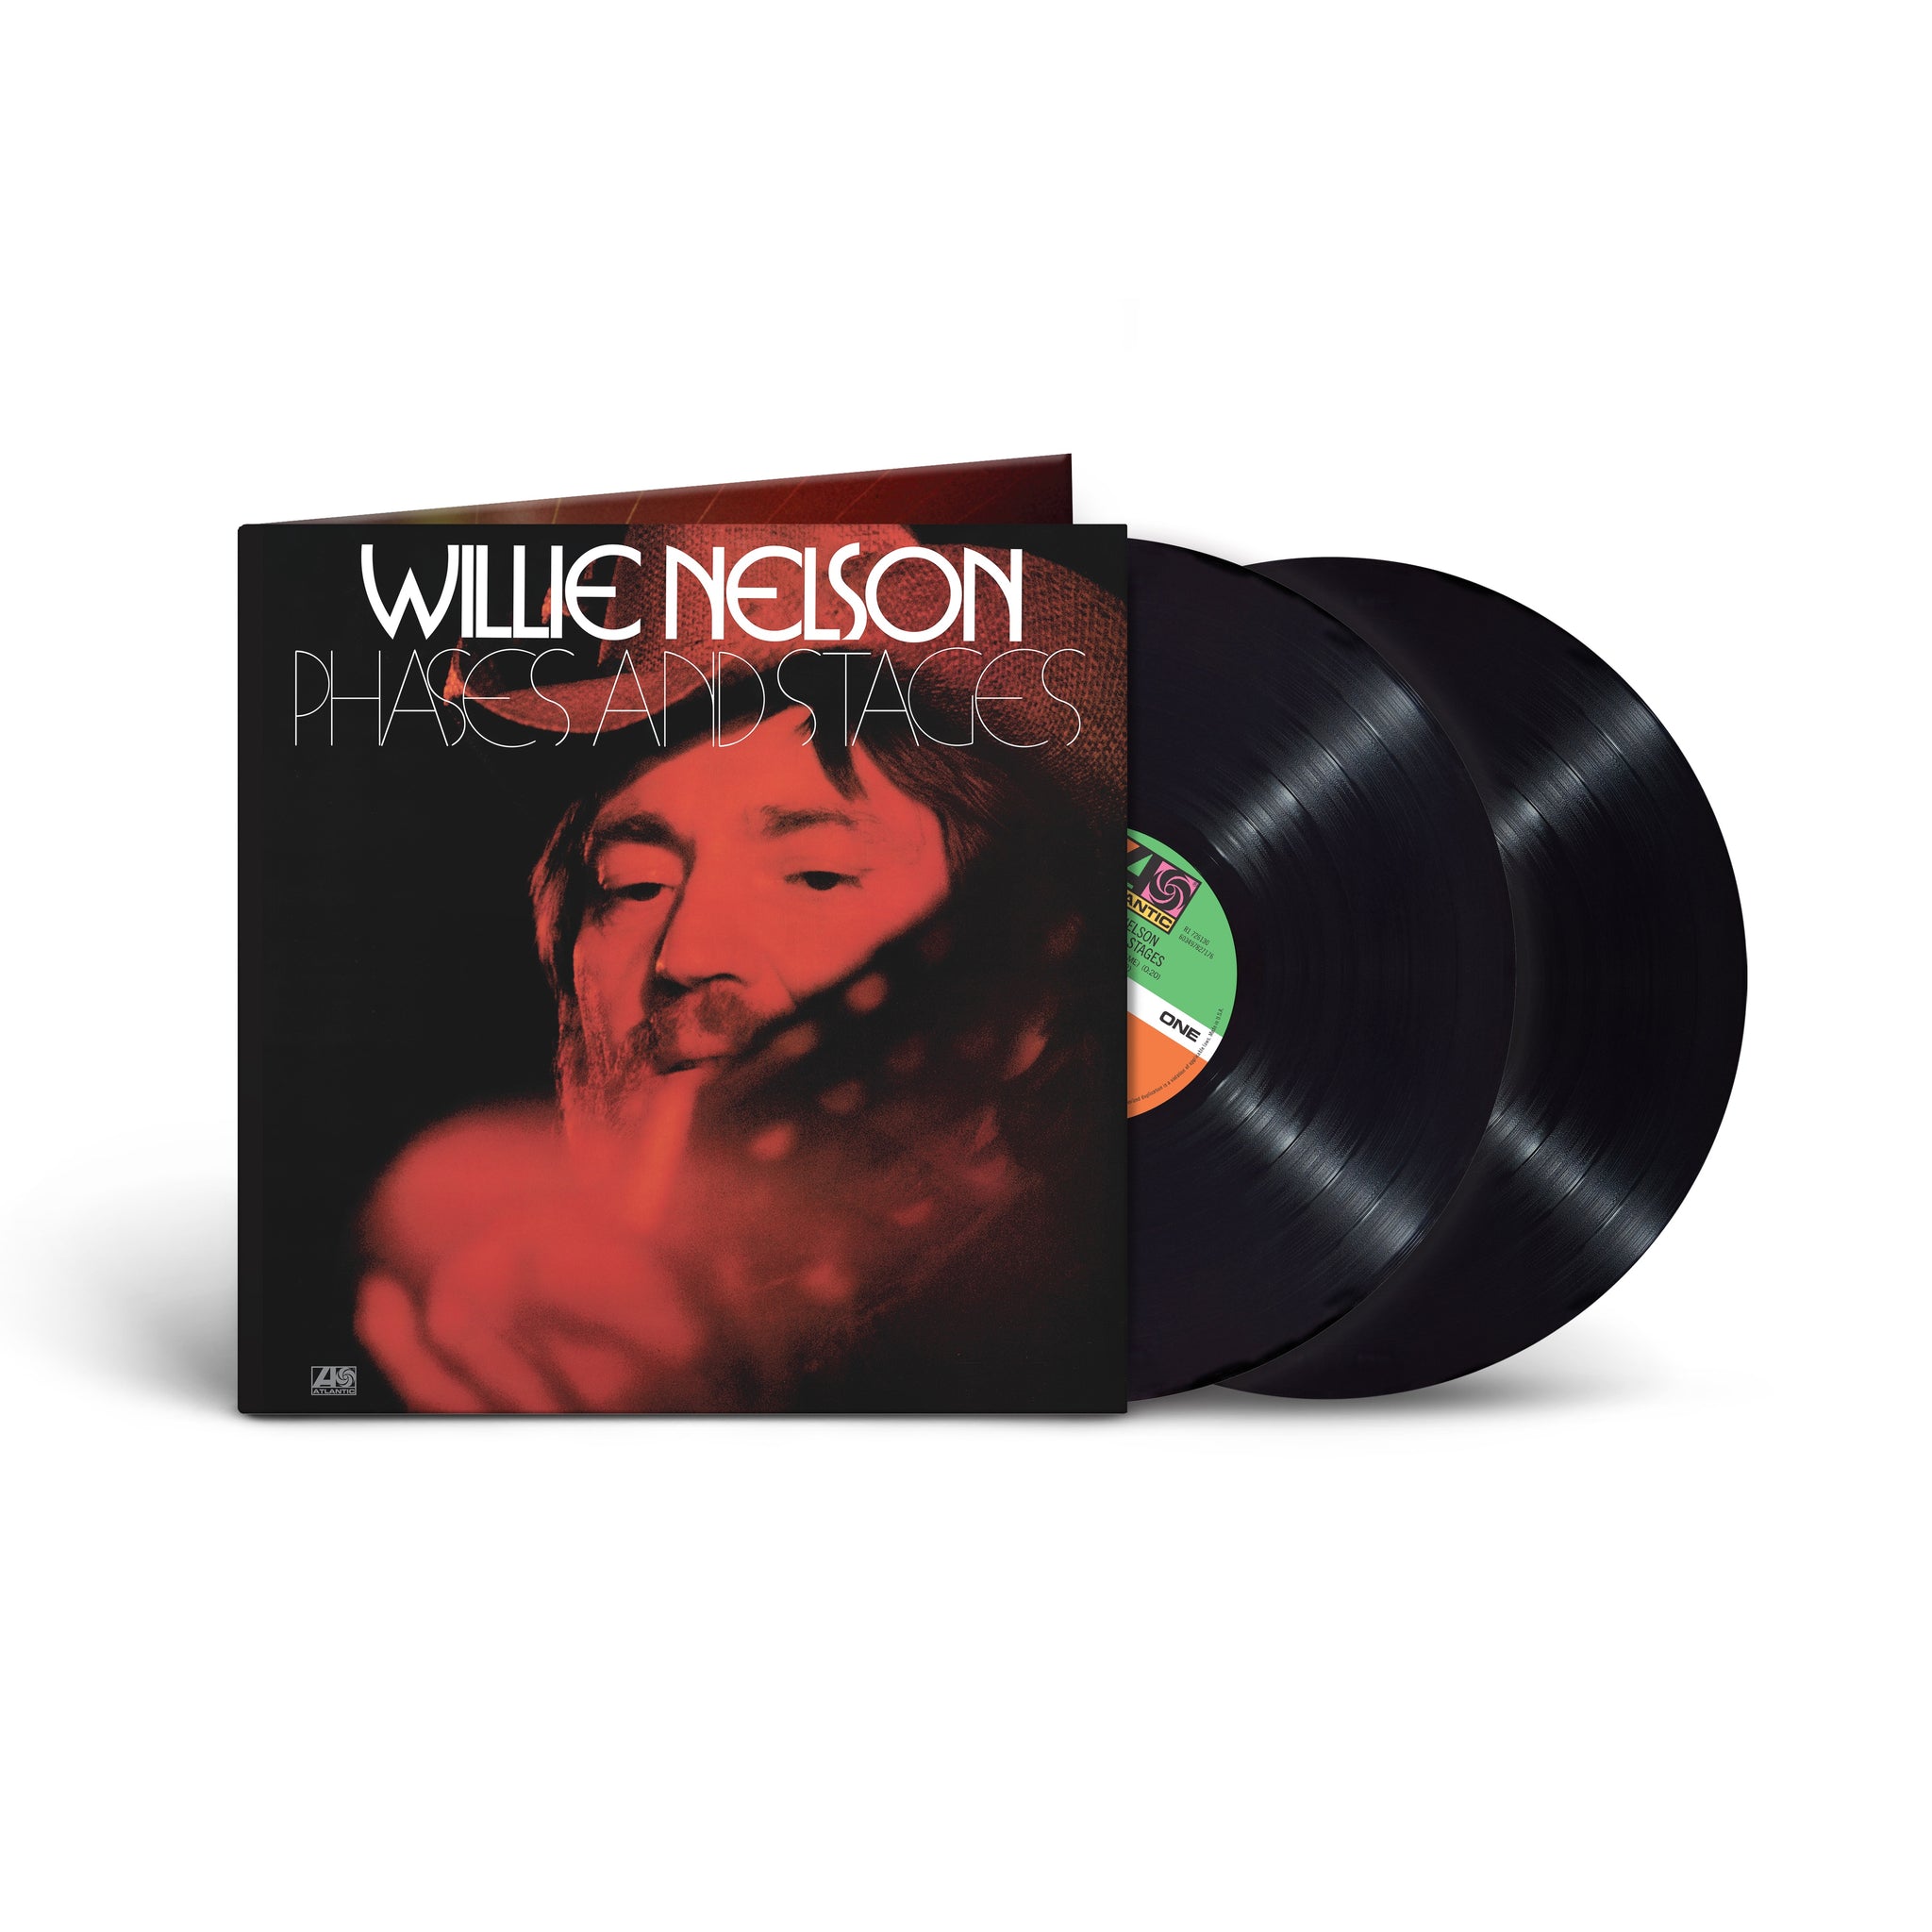 WILLIE NELSON - Phases and Stages - 2 LP - 140g Black Vinyl
  [RSD 2024]